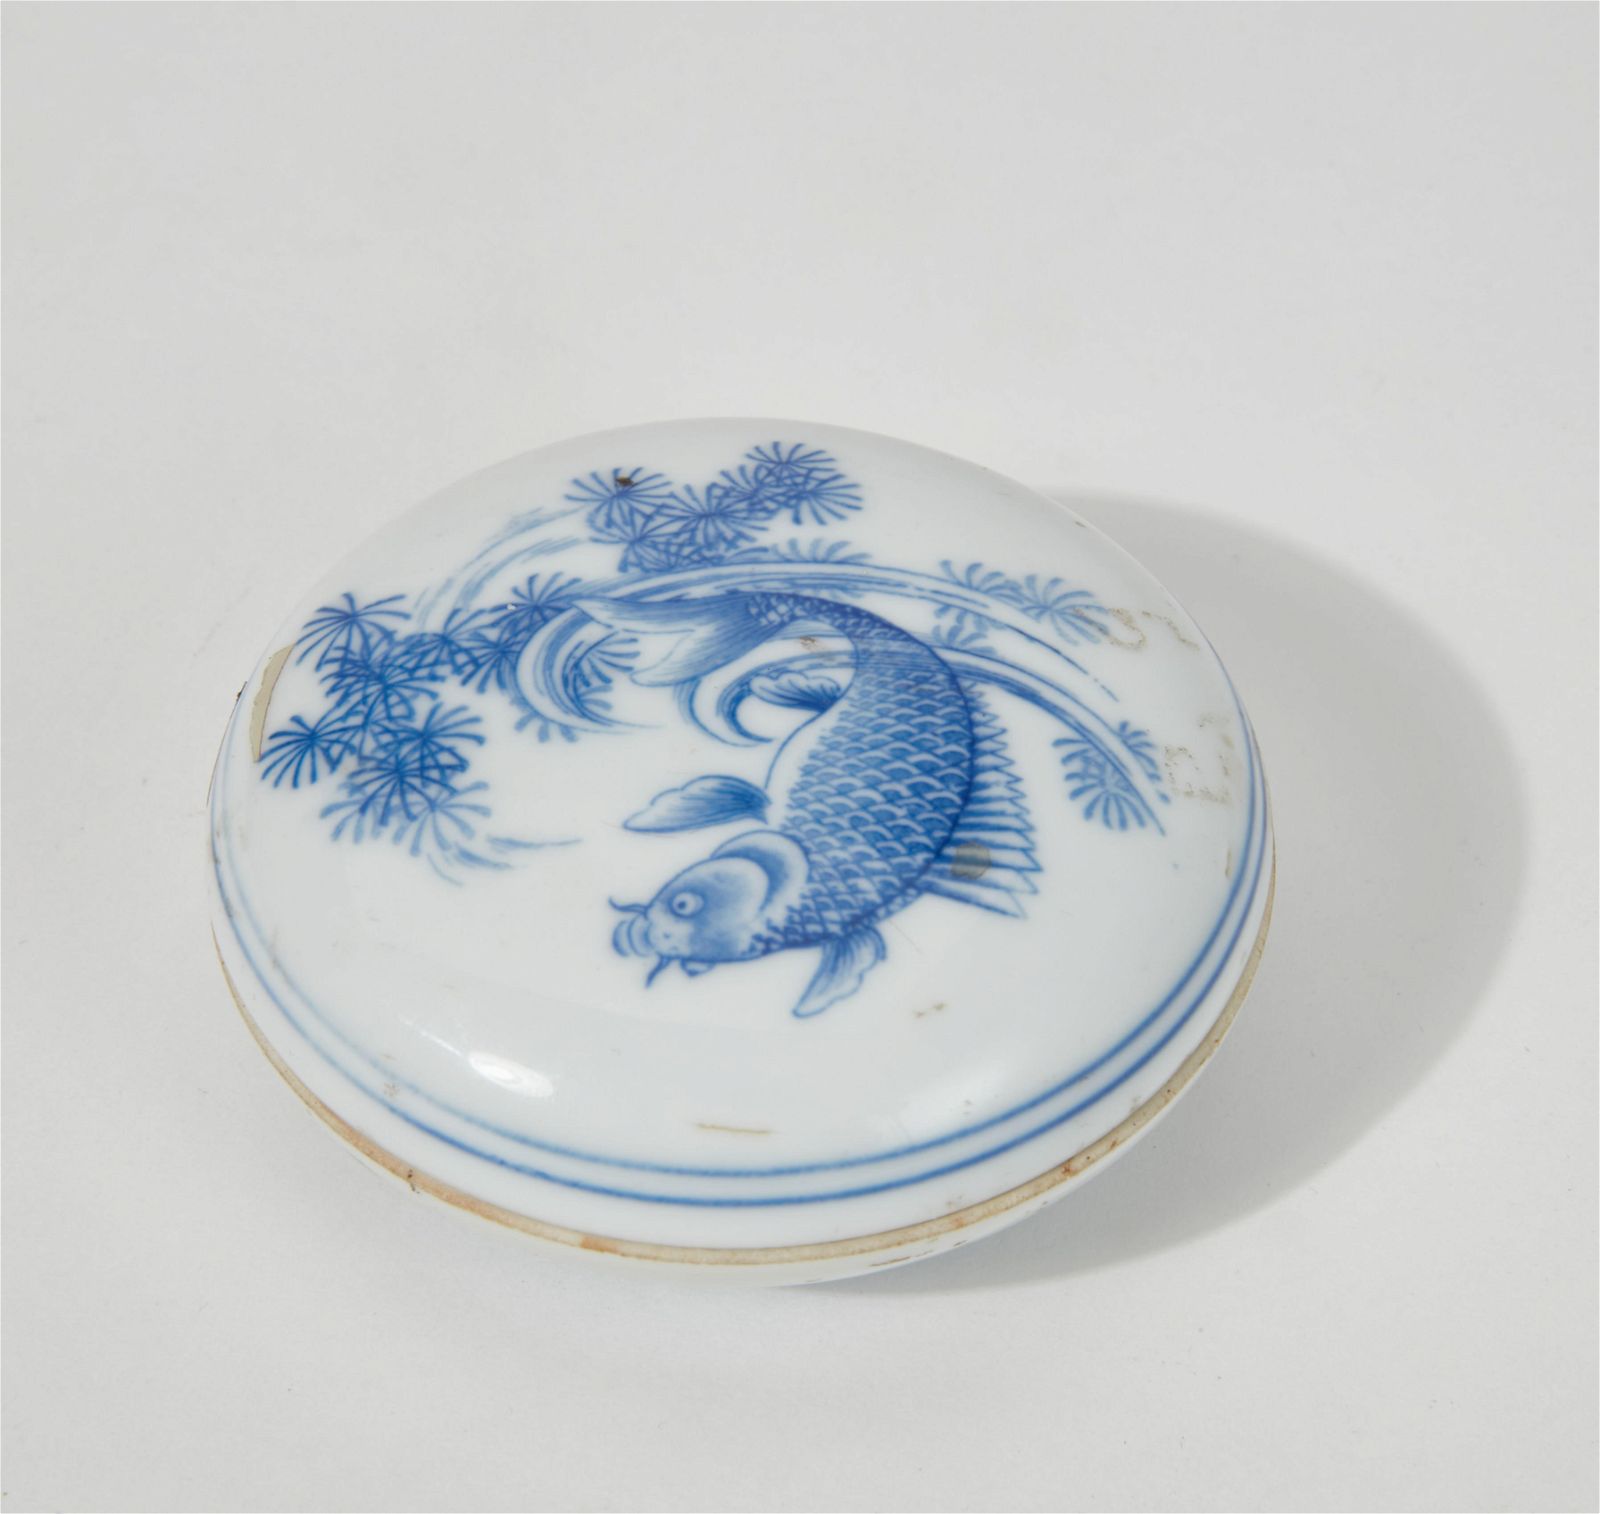 A CHINESE BLUE AND WHITE GLAZED